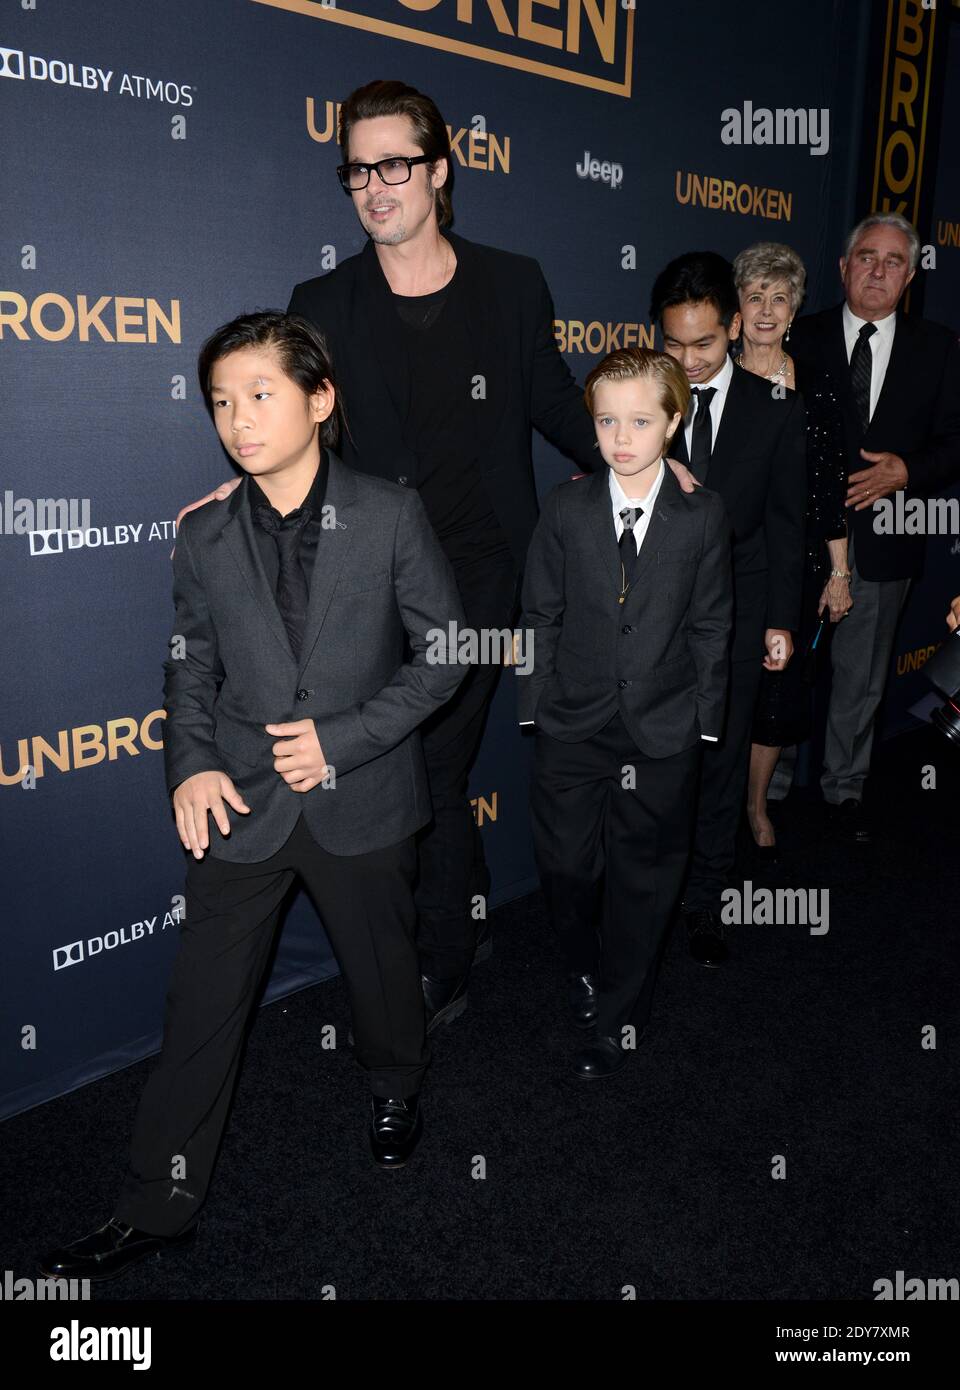 Brad Pitt, Pax Thien Jolie-Pitt, Shiloh Nouvel Jolie-Pitt and Maddox Jolie-Pitt attend the premiere of Universal Studios Unbroken at TCL Chinese Theatre on December 15, 2014 in Los Angeles, CA, USA. Photo by Lionel Hahn/ABACAPRESS.COM Stock Photo